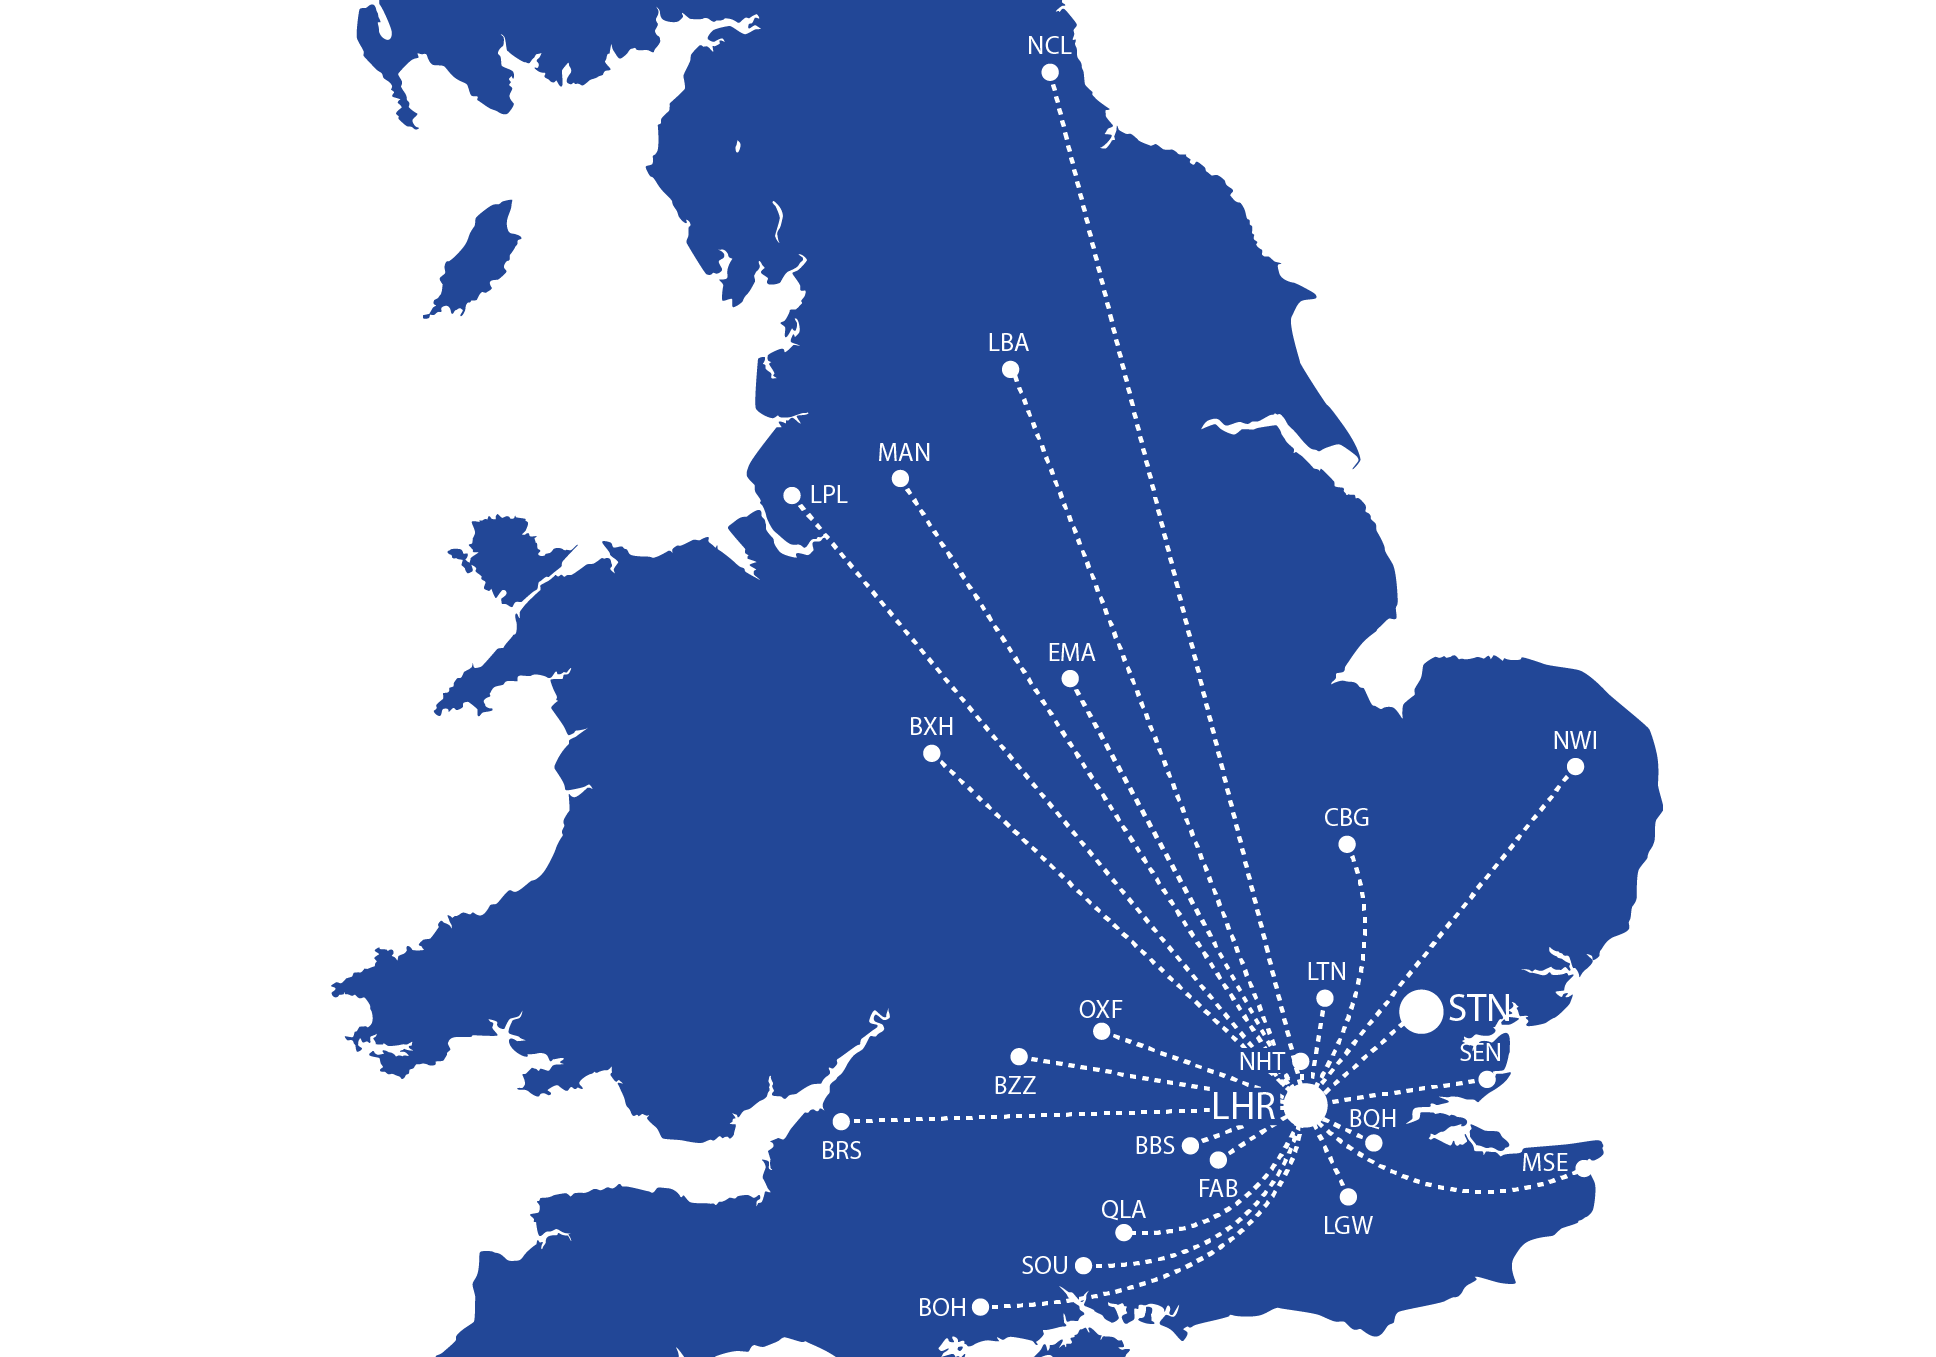 Royalblue Delivery Map - 24 airports nationwide